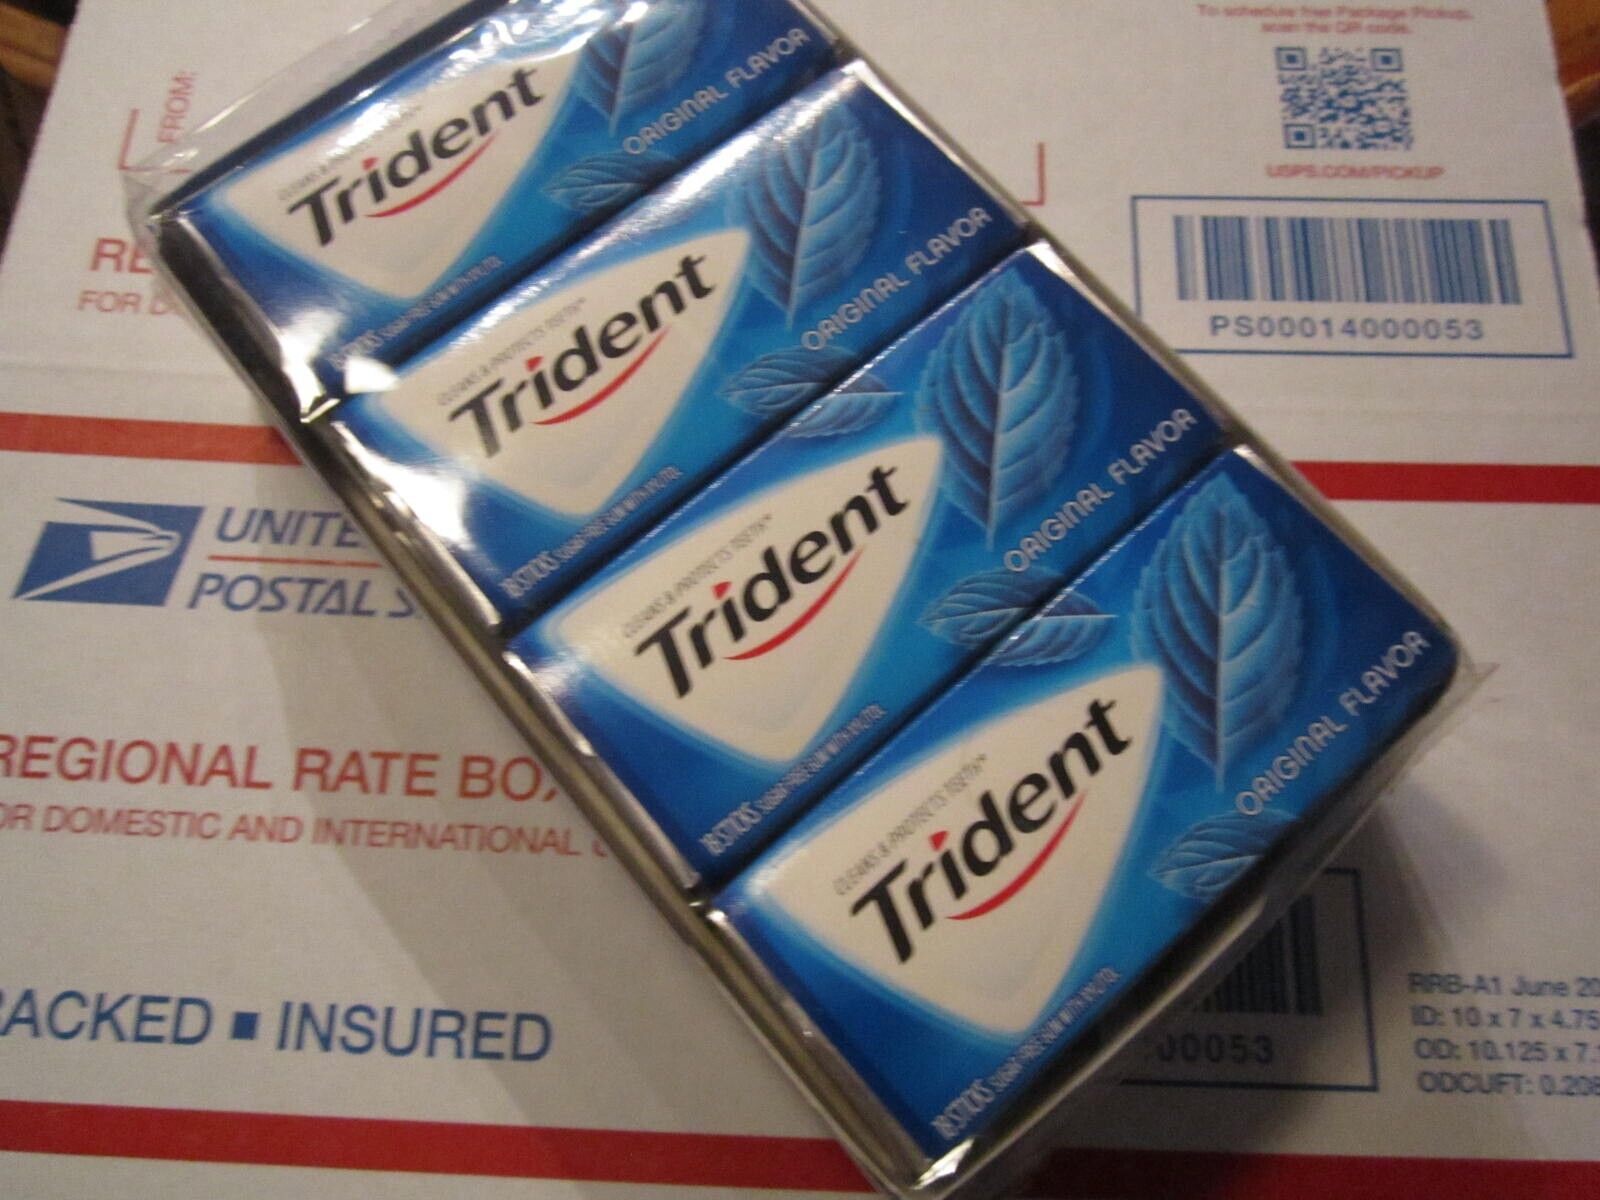 Trident Original Flavor Cleans & Protects Teeth, 12 Sealed 18 Stick Packs, READ